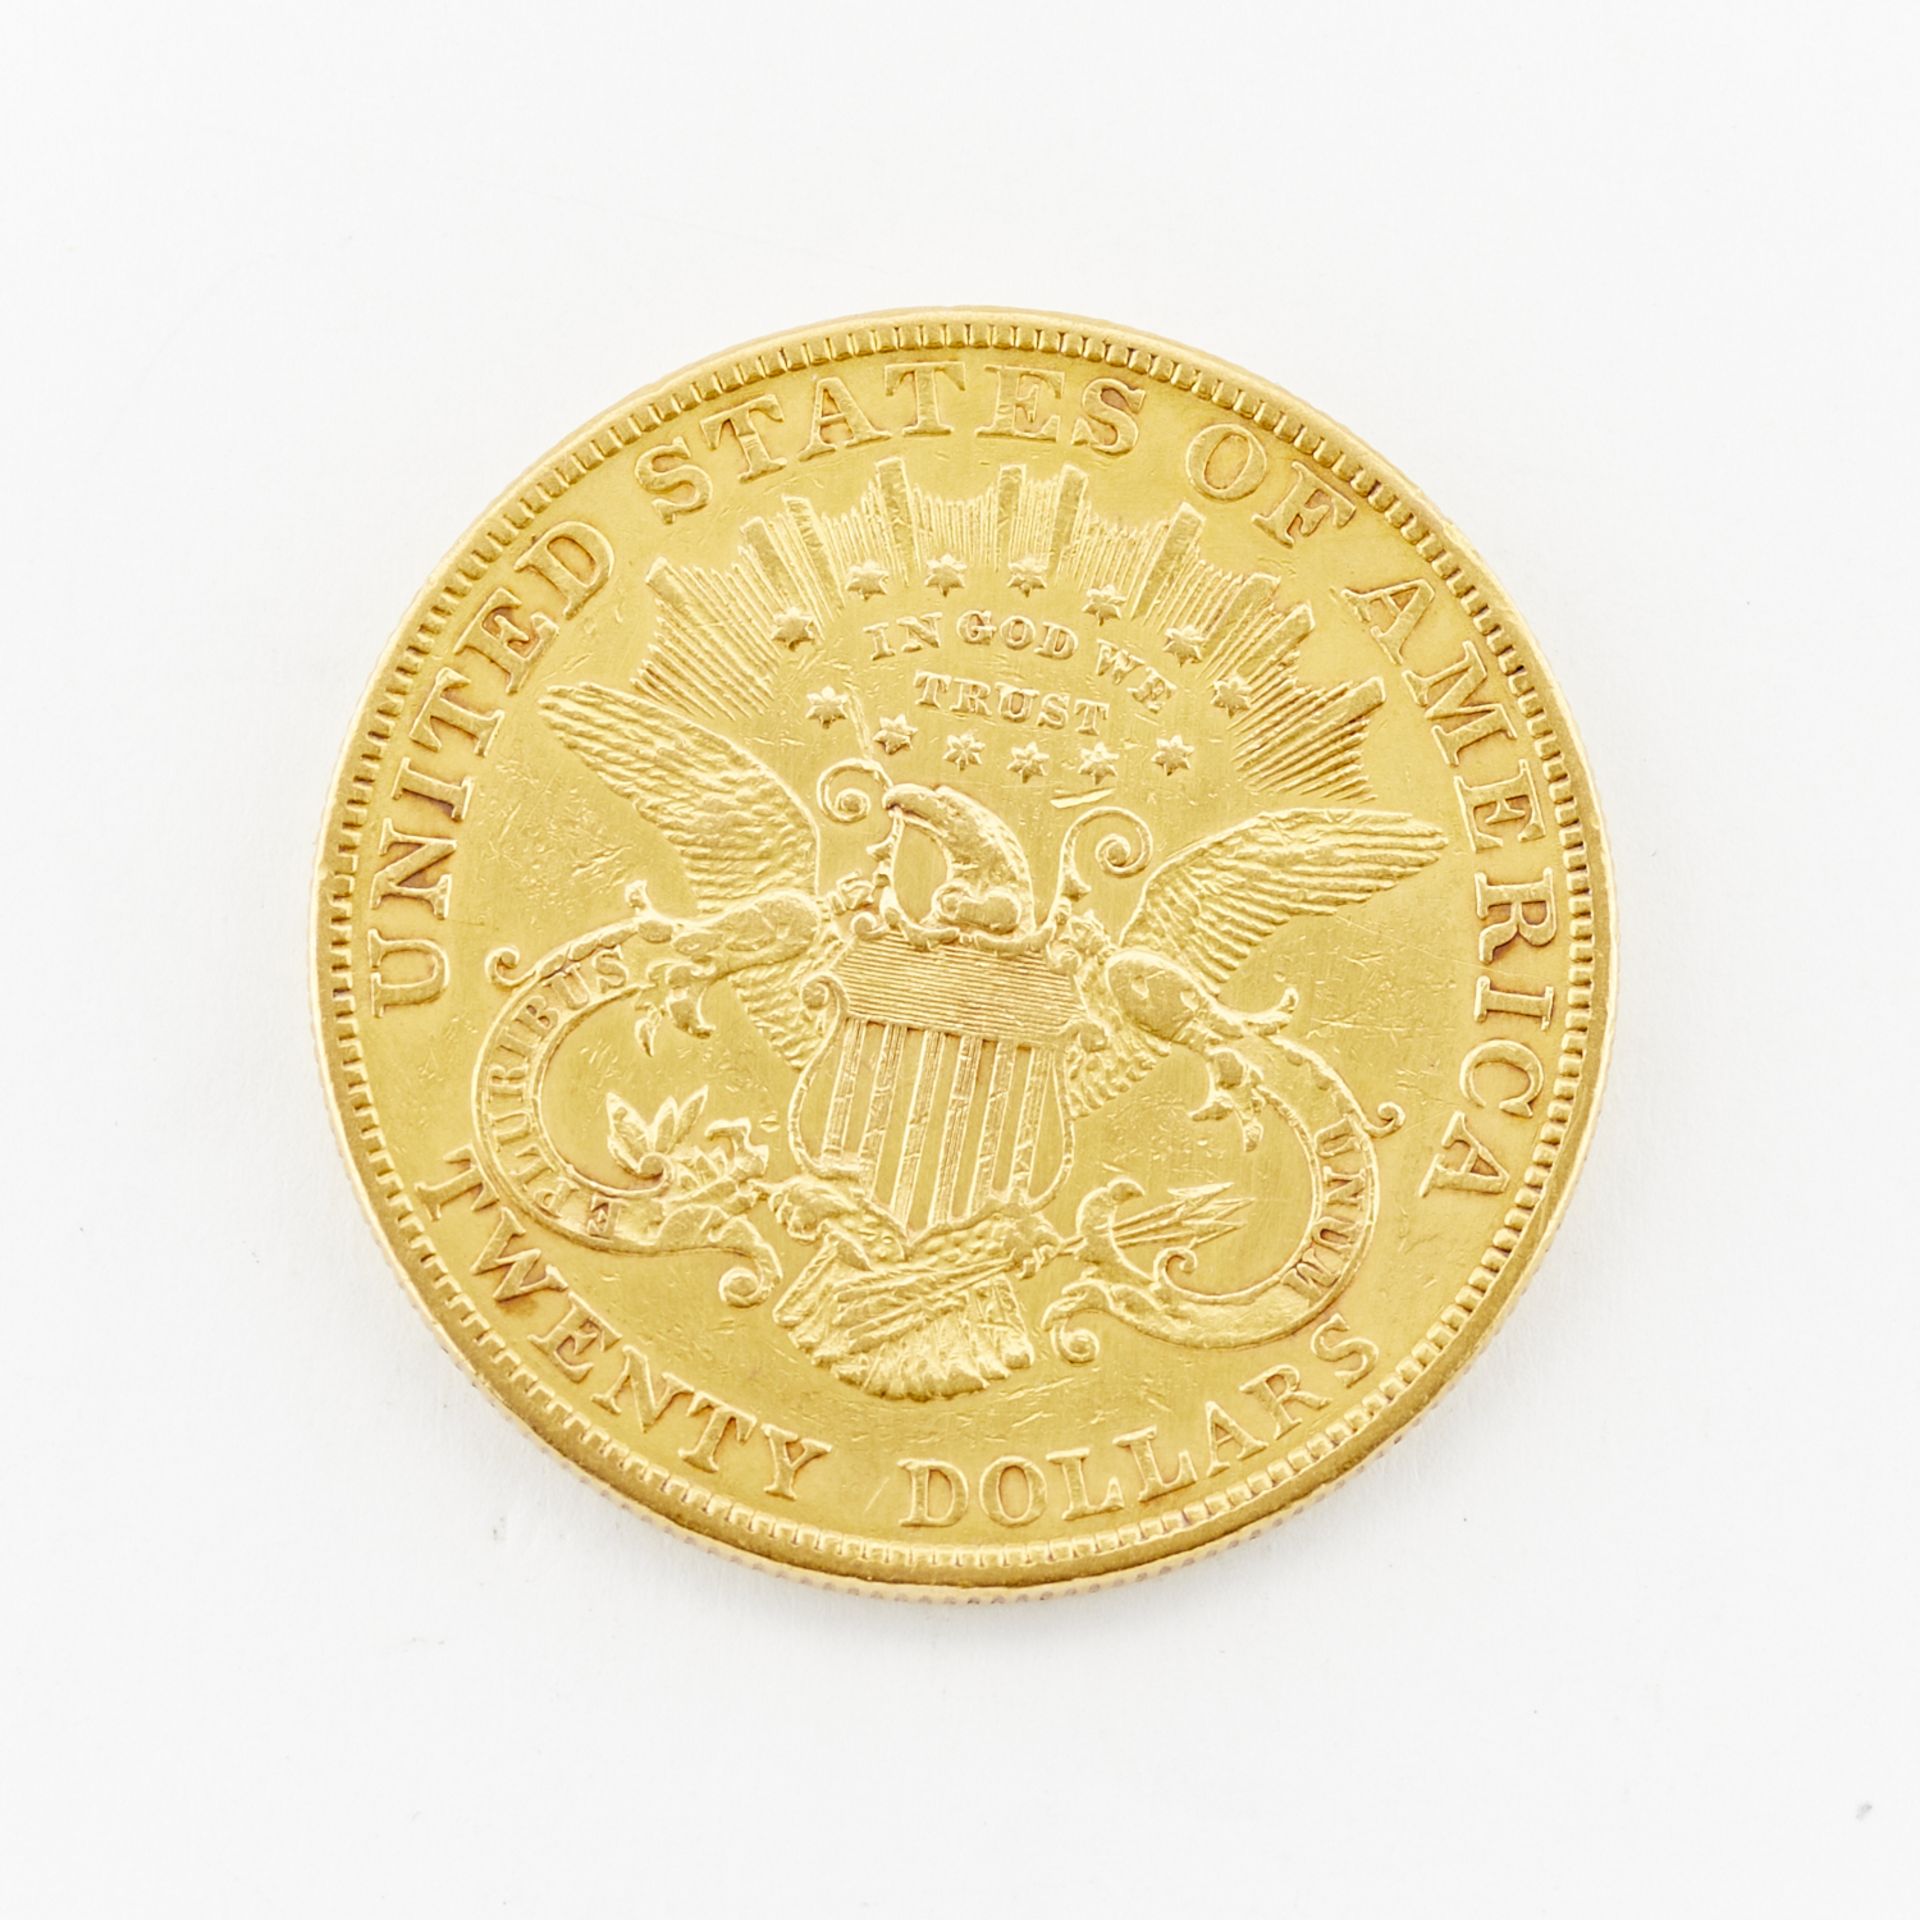 1904 $20 Gold Liberty Head Coin - Image 2 of 2